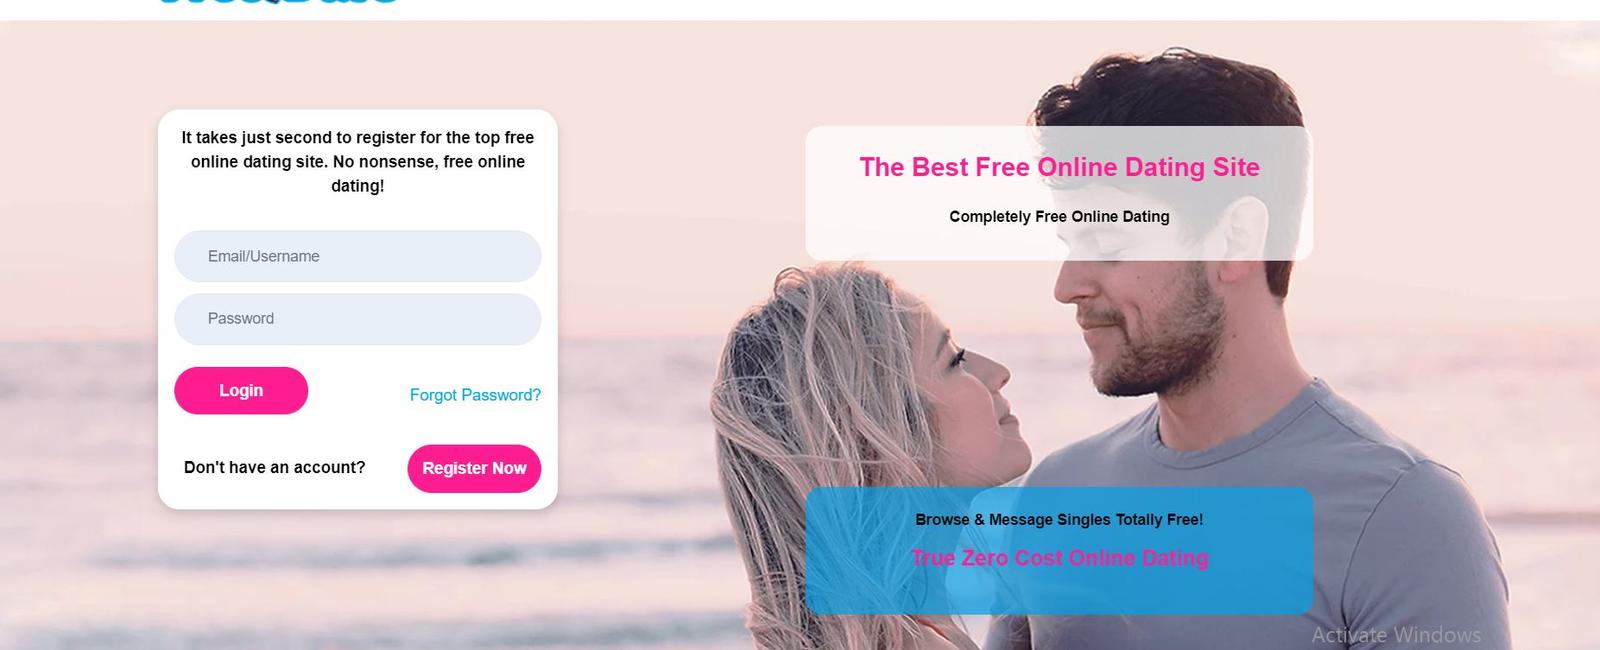 Online dating generates more than 1 billion each year